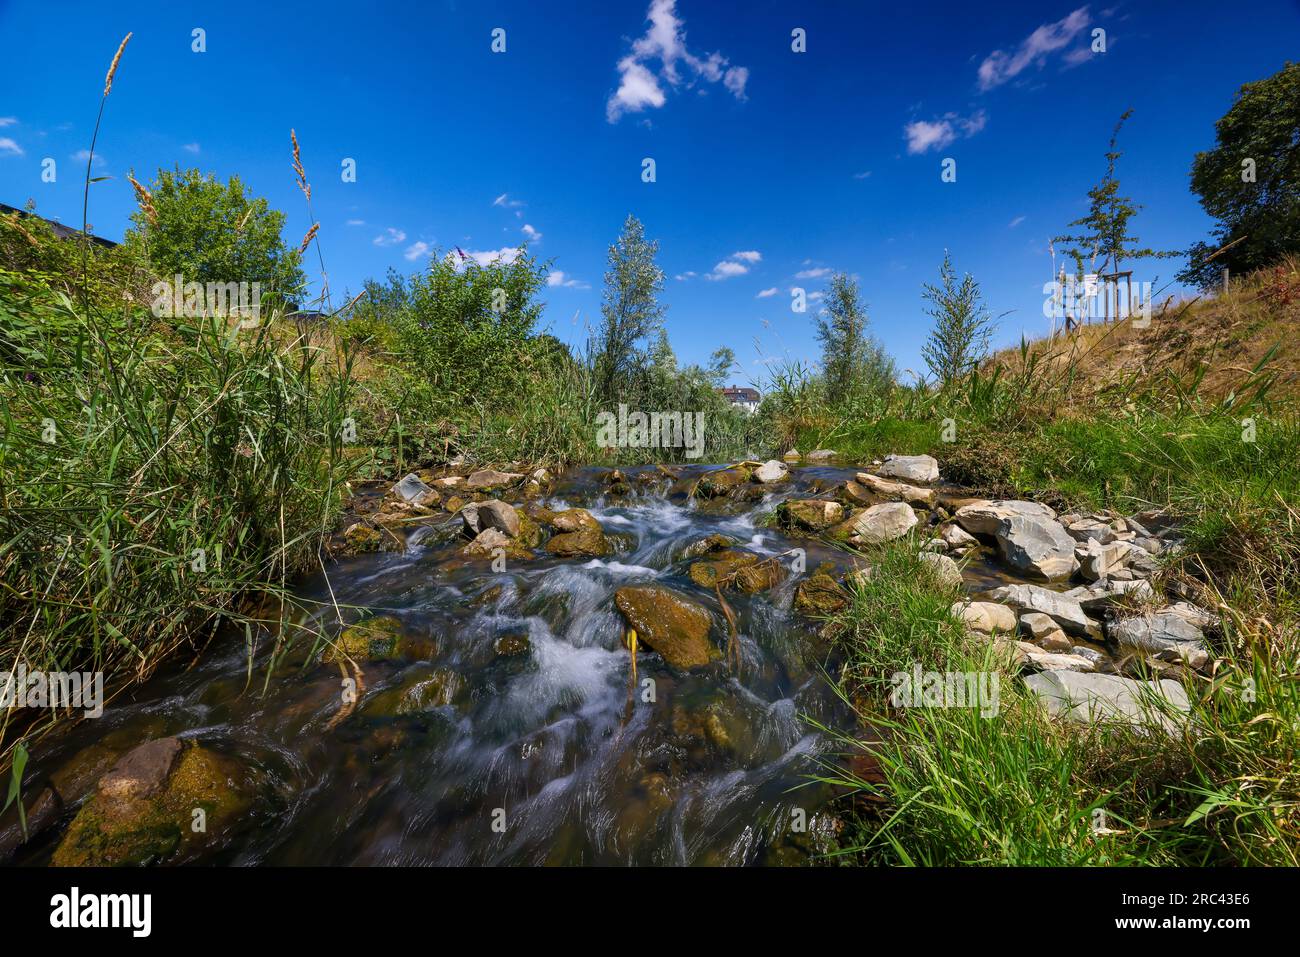 Recklinghausen, North Rhine-Westphalia, Germany - Renaturalized Hellbach, renaturalized watercourse, the Hellbach is now free of wastewater after the Stock Photo